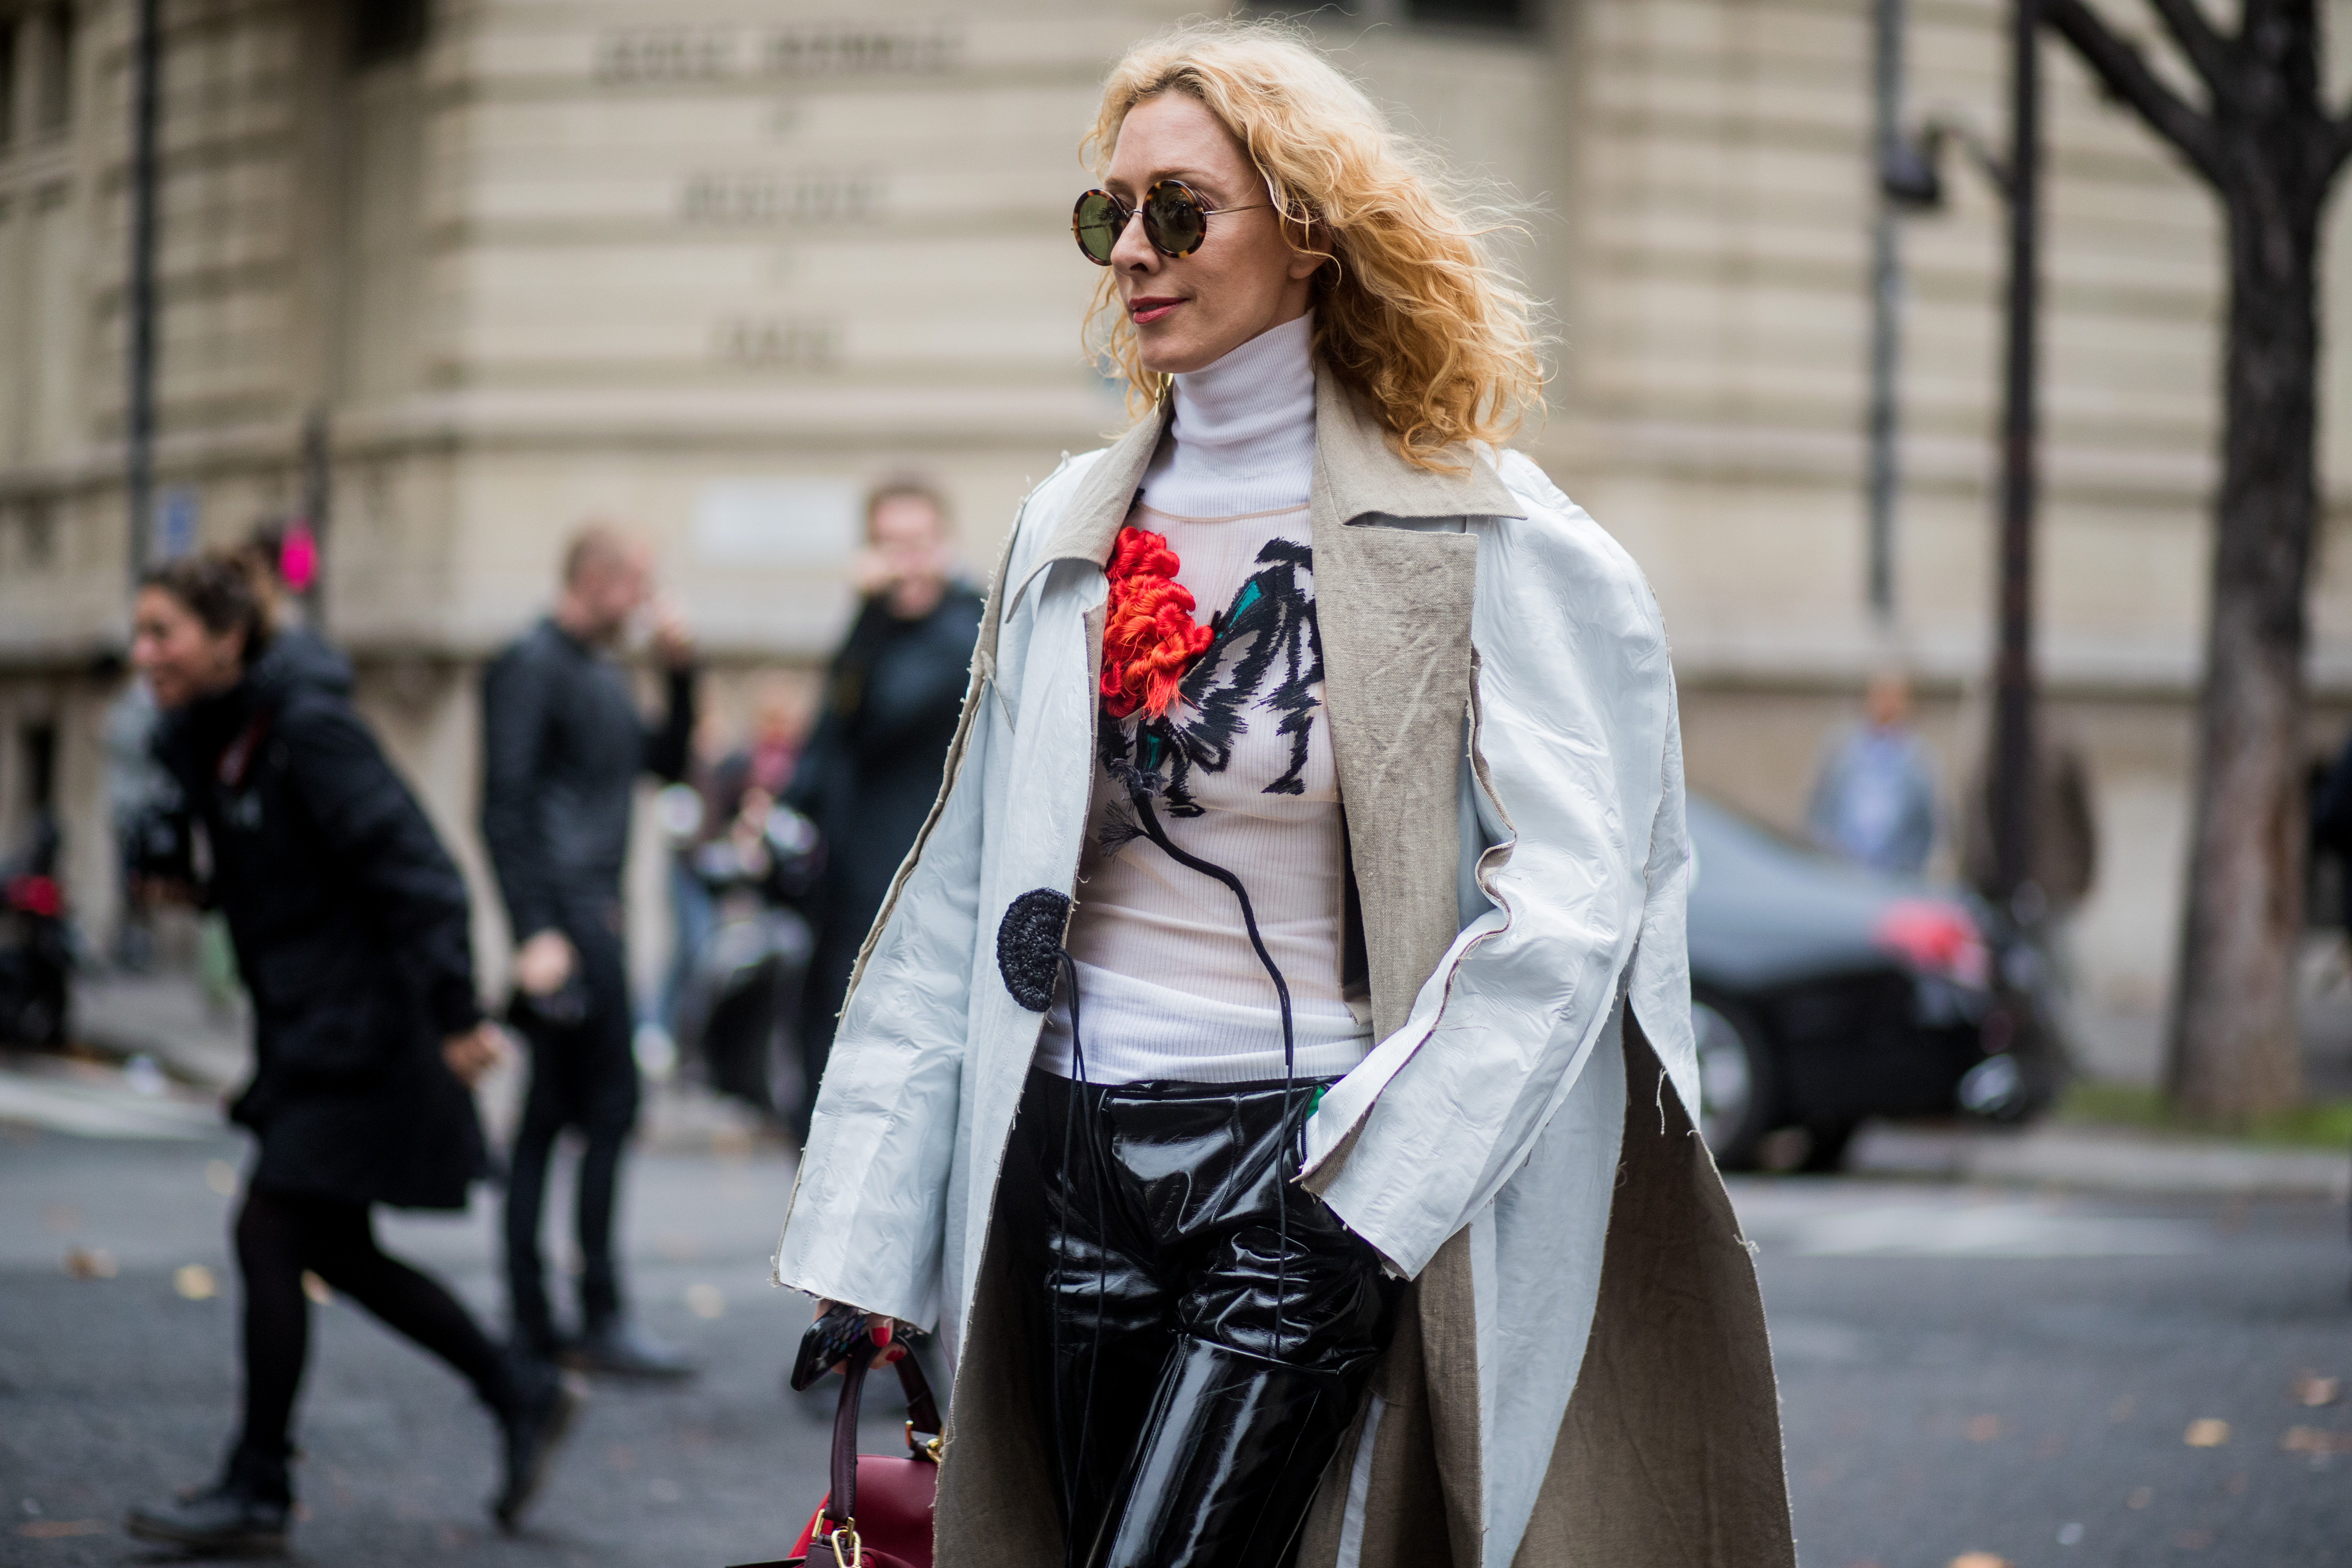 PARIS, FRANCE - OCTOBER 01: Elina Halimi seen outside Valentino during Paris Fashion Week Spring/Summer 2018 on October 1, 2017 in Paris, France. (Photo by Christian Vierig/Getty Images)